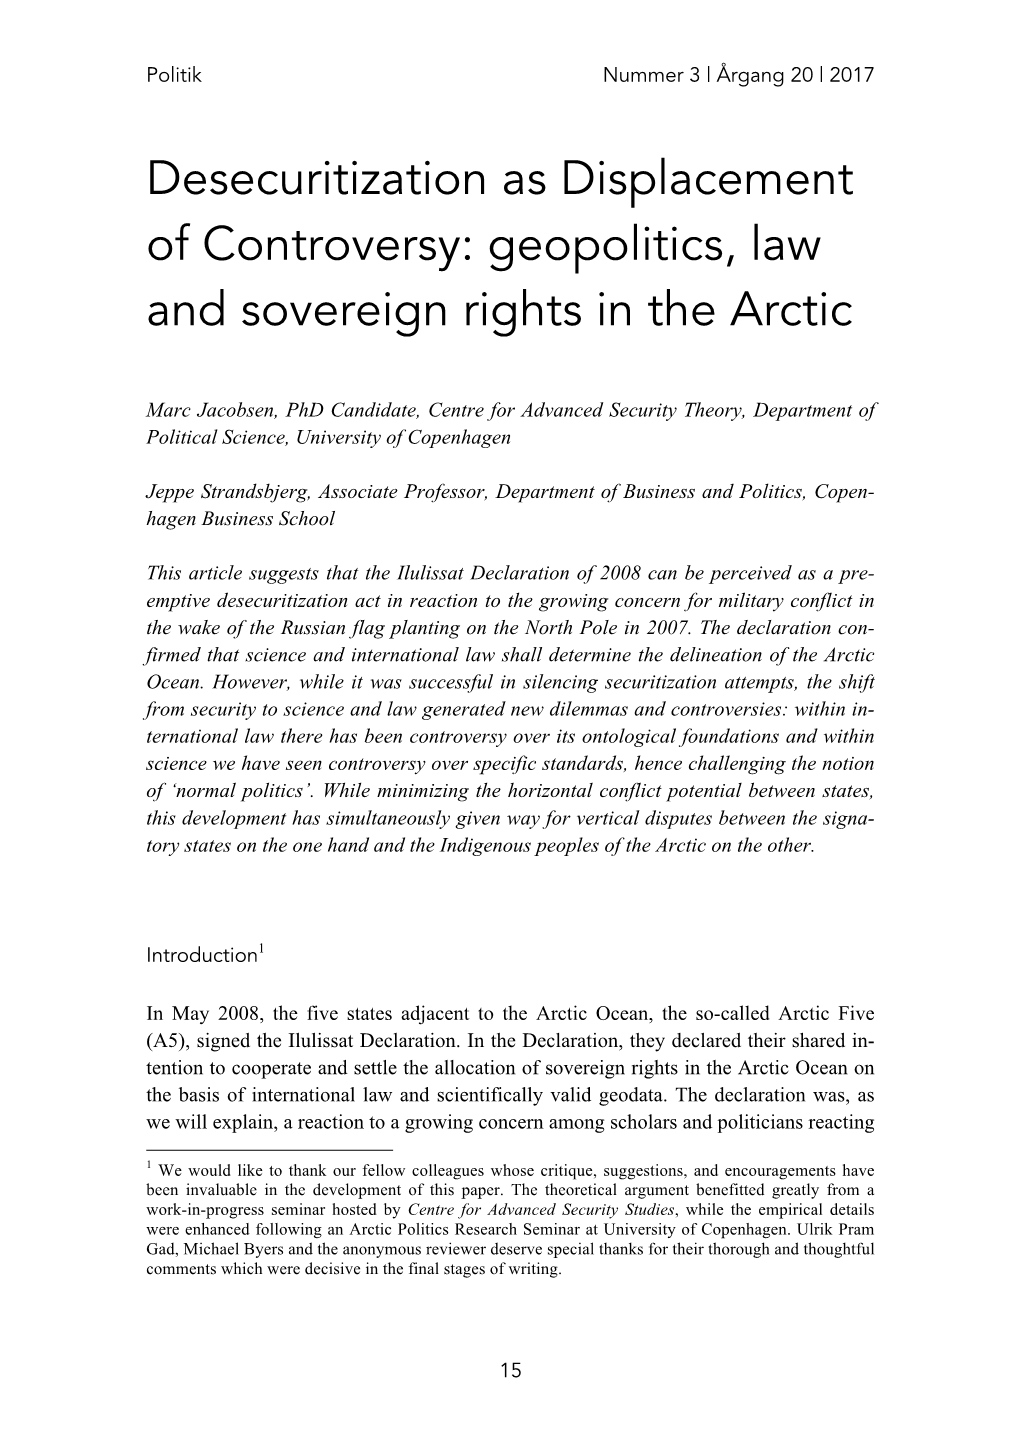 Desecuritization As Displacement of Controversy: Geopolitics, Law and Sovereign Rights in the Arctic